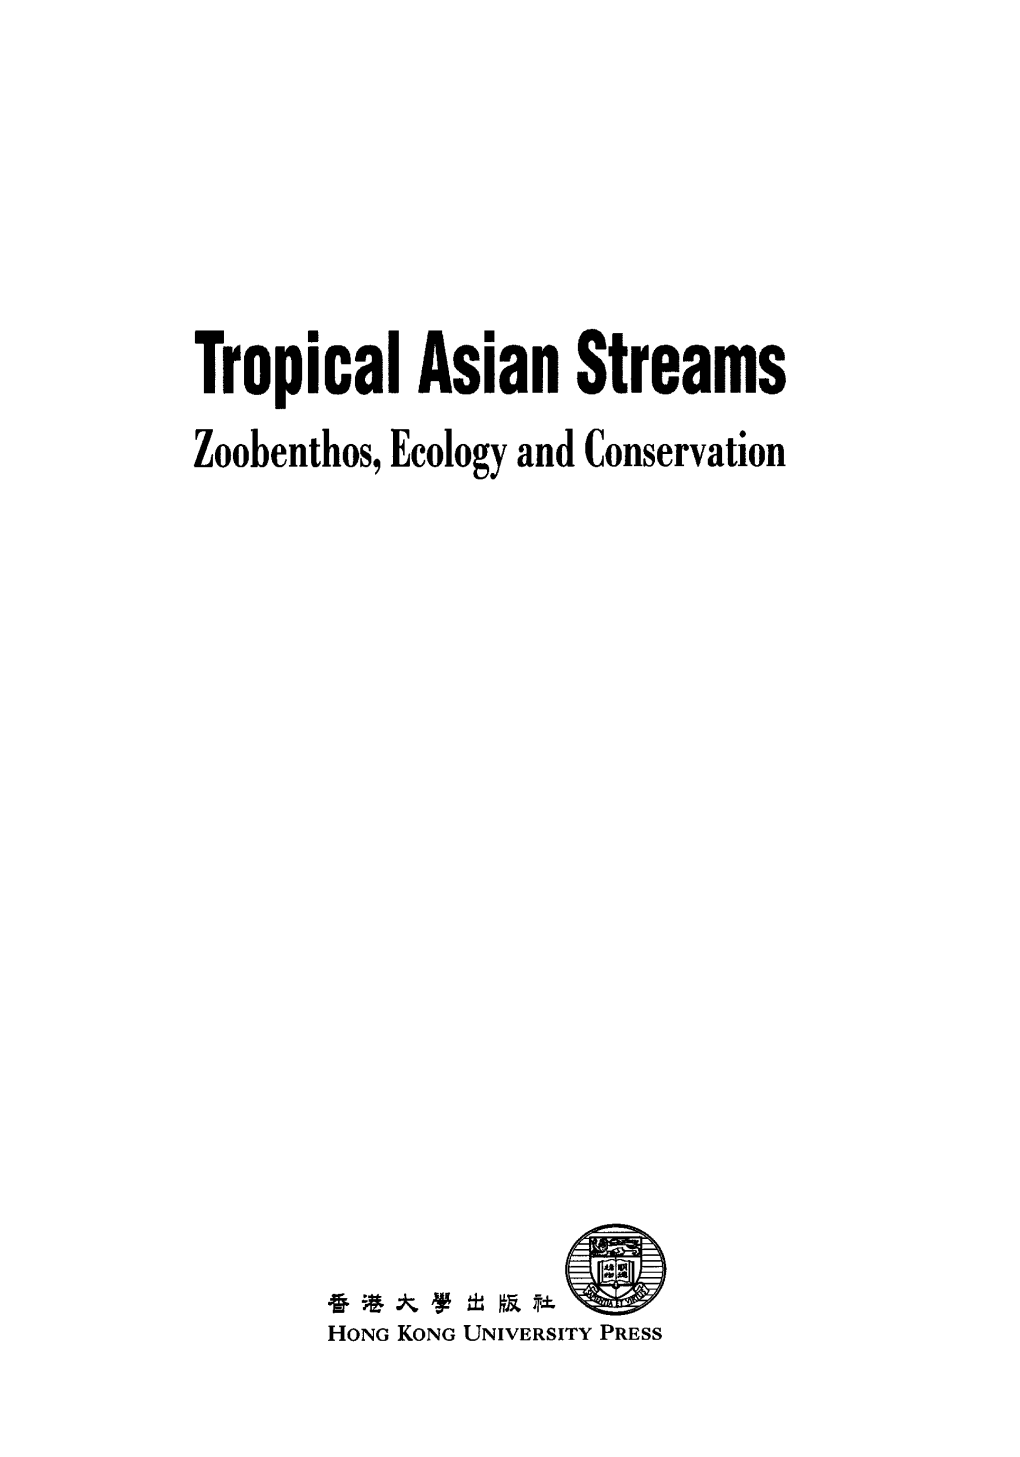 Tropical Asian Streams Zoohenthos, Ecology and Conservation